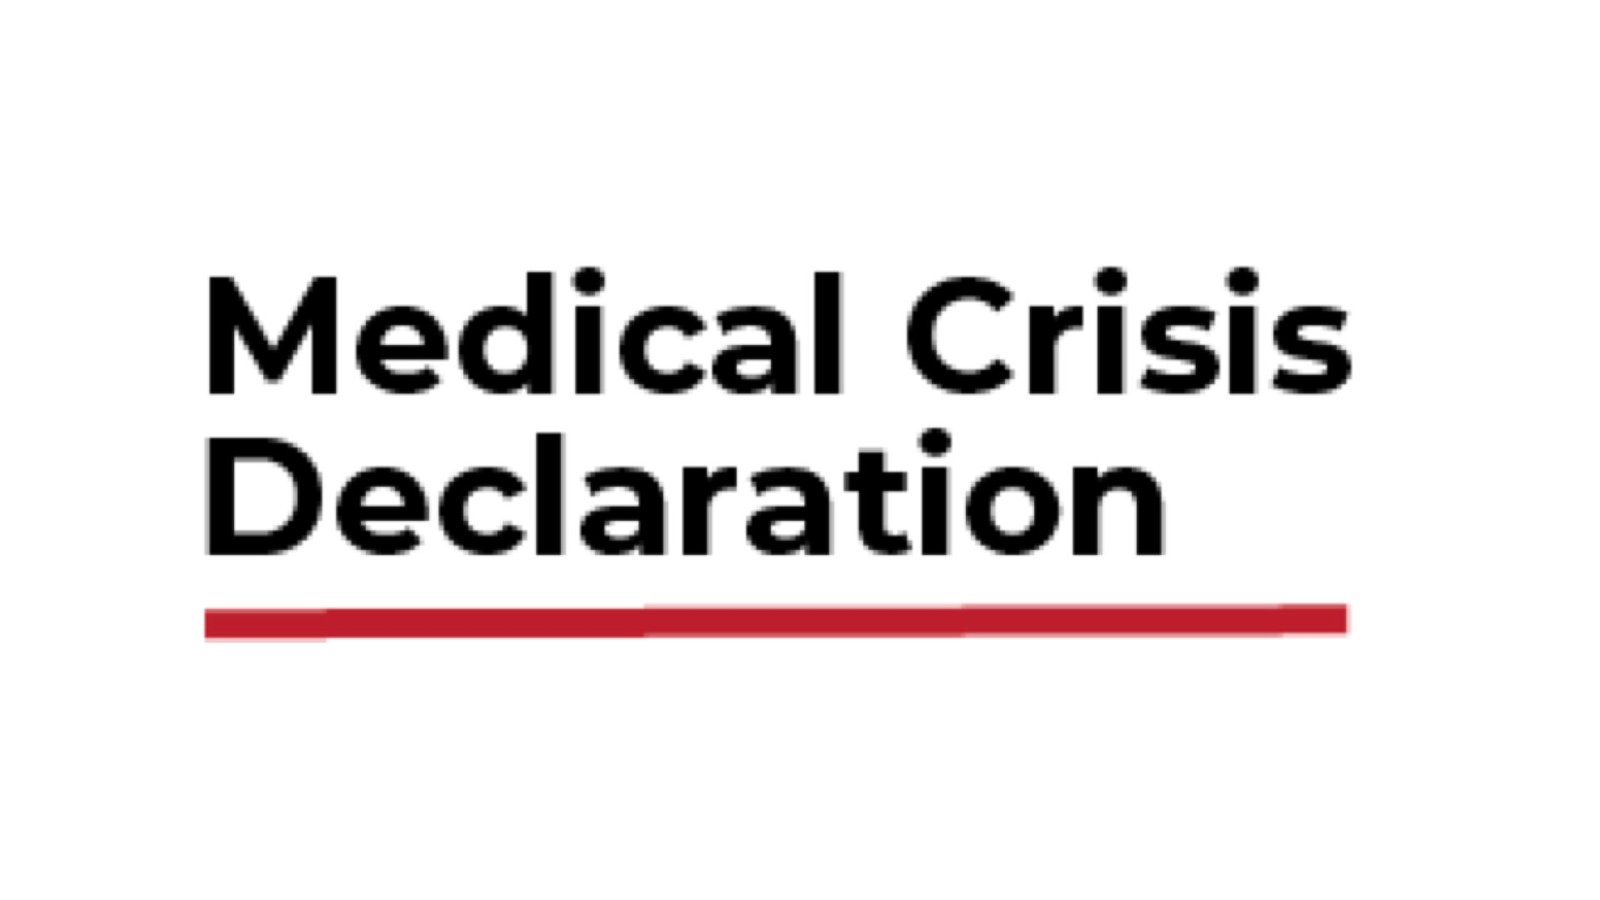 Medical Crisis Declaration Issued by Scientists & Doctors